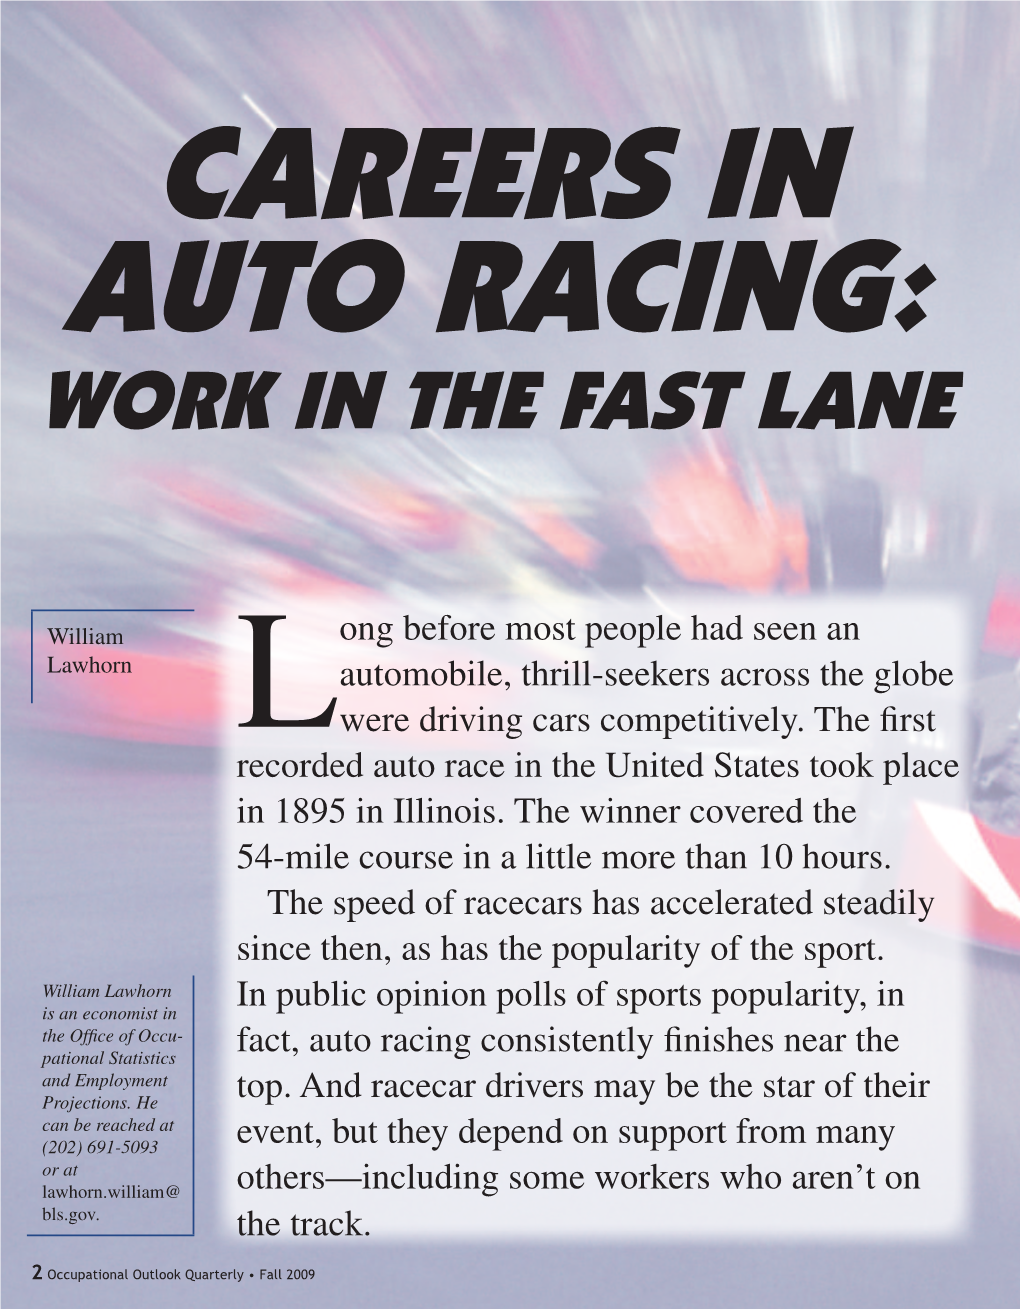 Careers in Auto Racing: Work in the Fast Lane